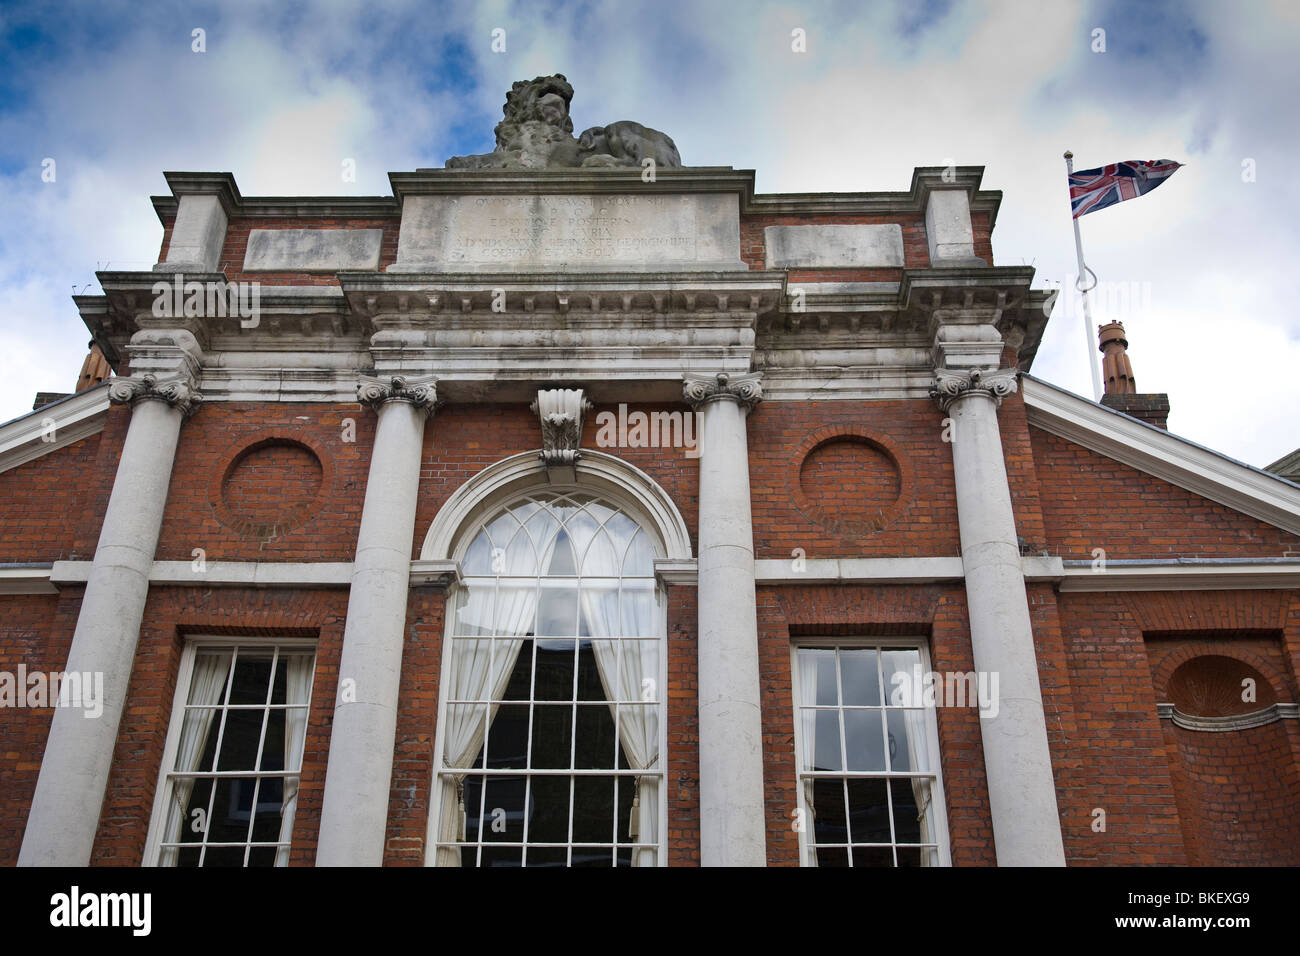 Front upper facade of the Butter Market or Market House designed by John Nash in 1808, Chichester, West Sussex, England. Stock Photo